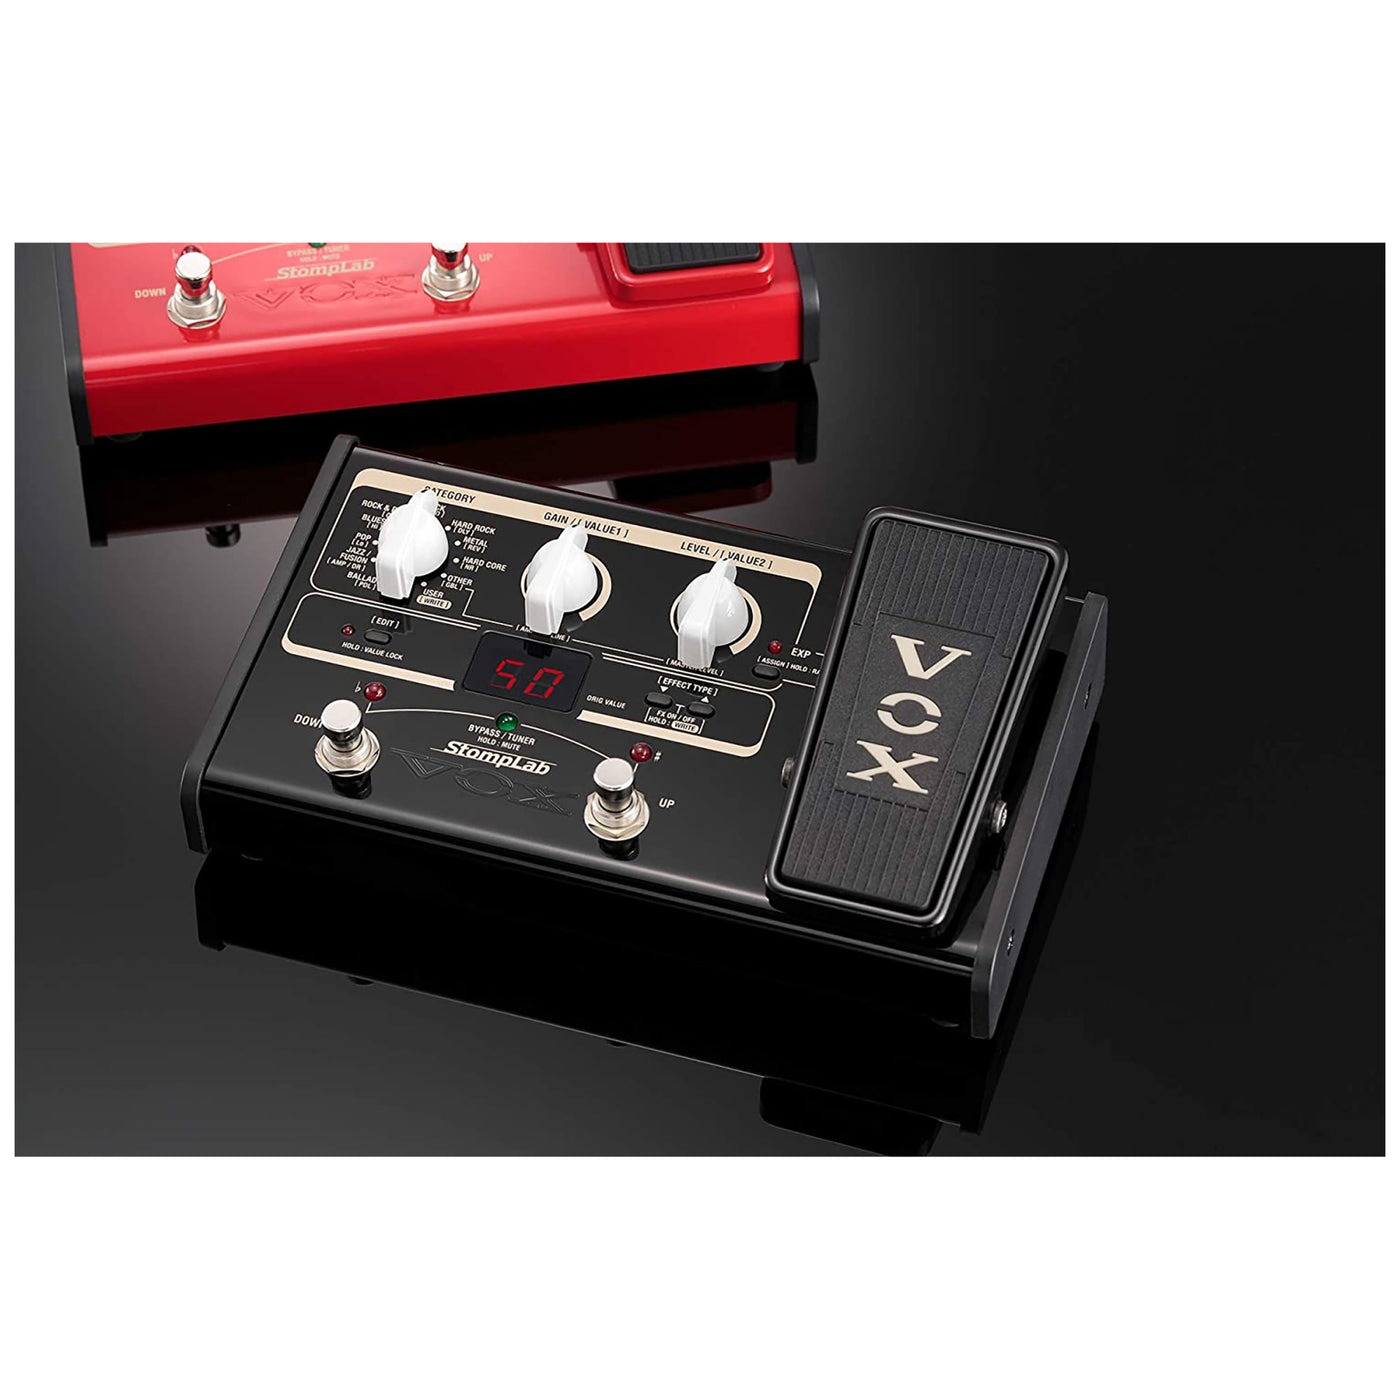 Vox StompLab 2G Modeling Effects Pedal